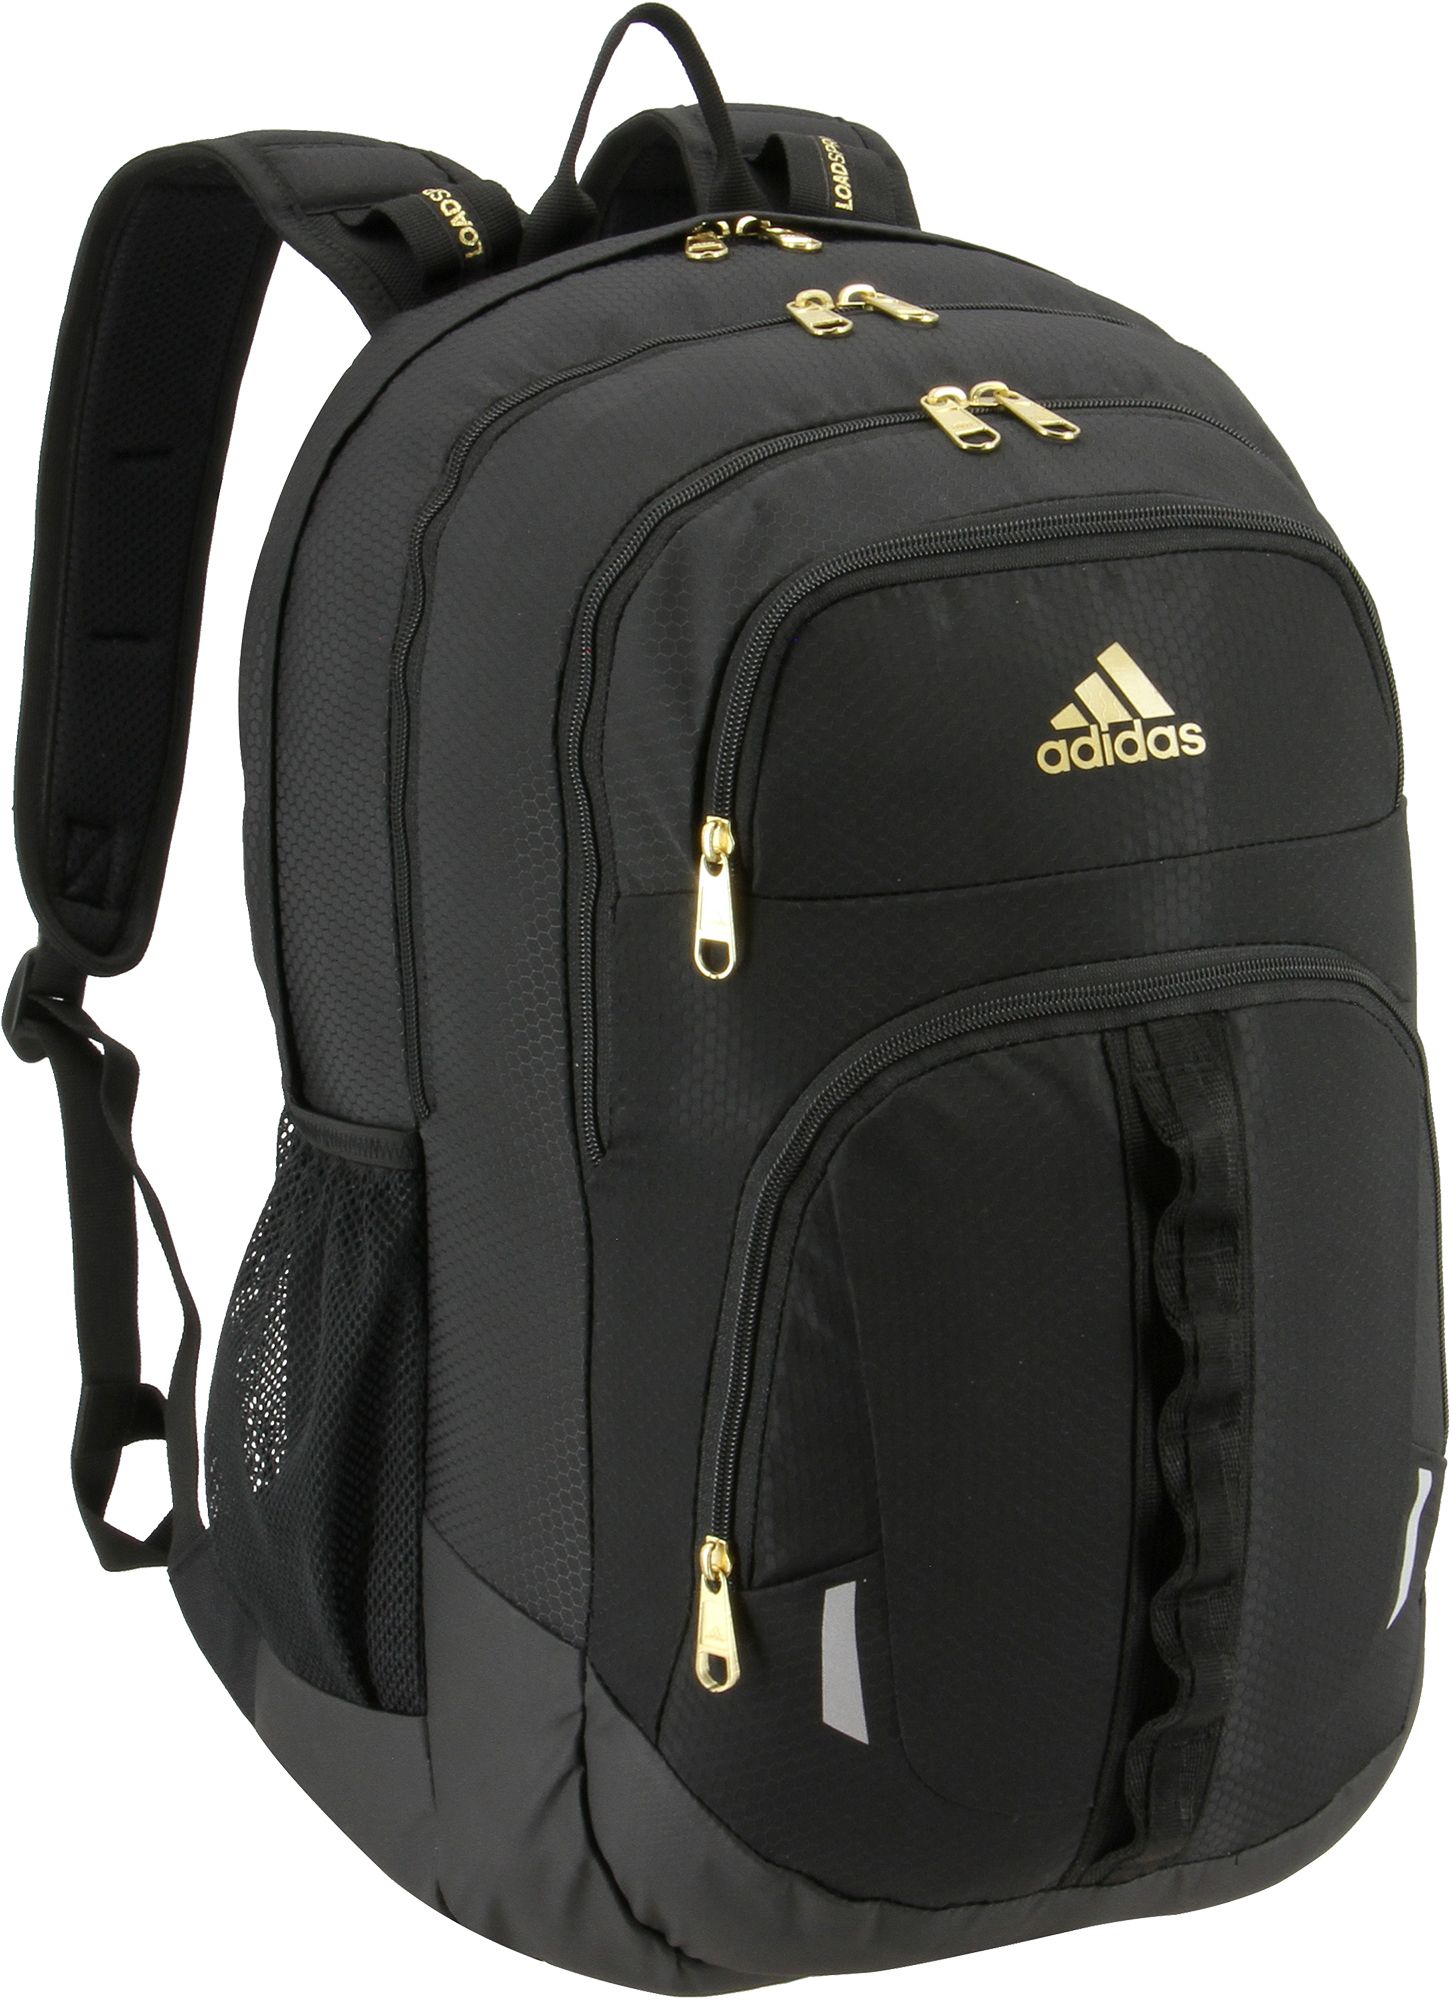 adidas prime 4 backpack review